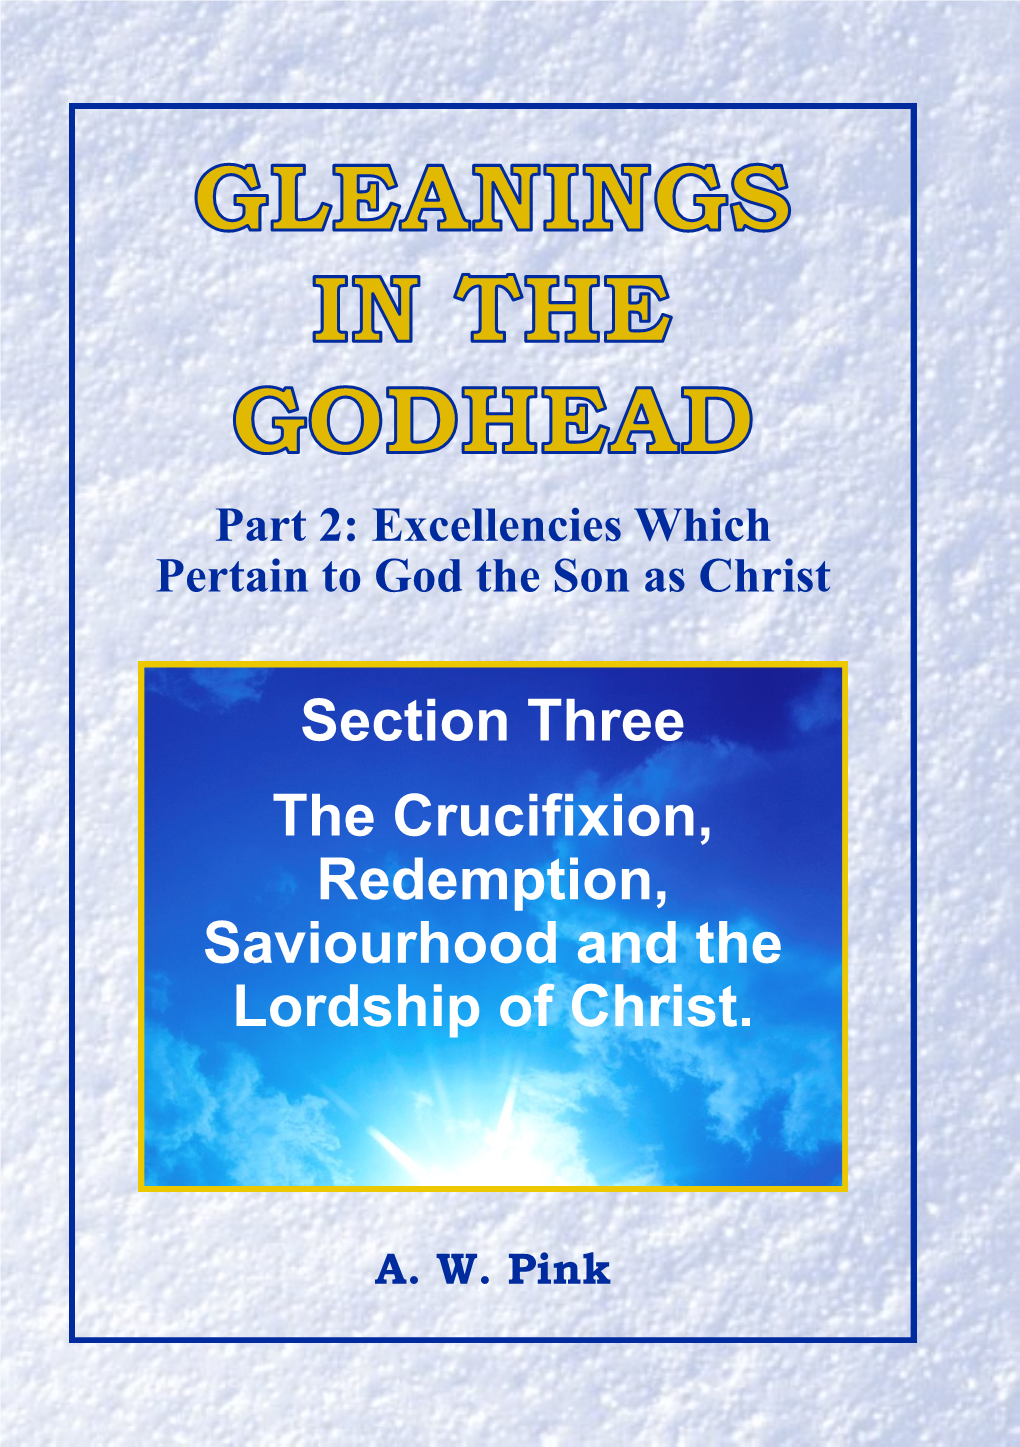 Section Three the Crucifixion, Redemption, Saviourhood and the Lordship of Christ